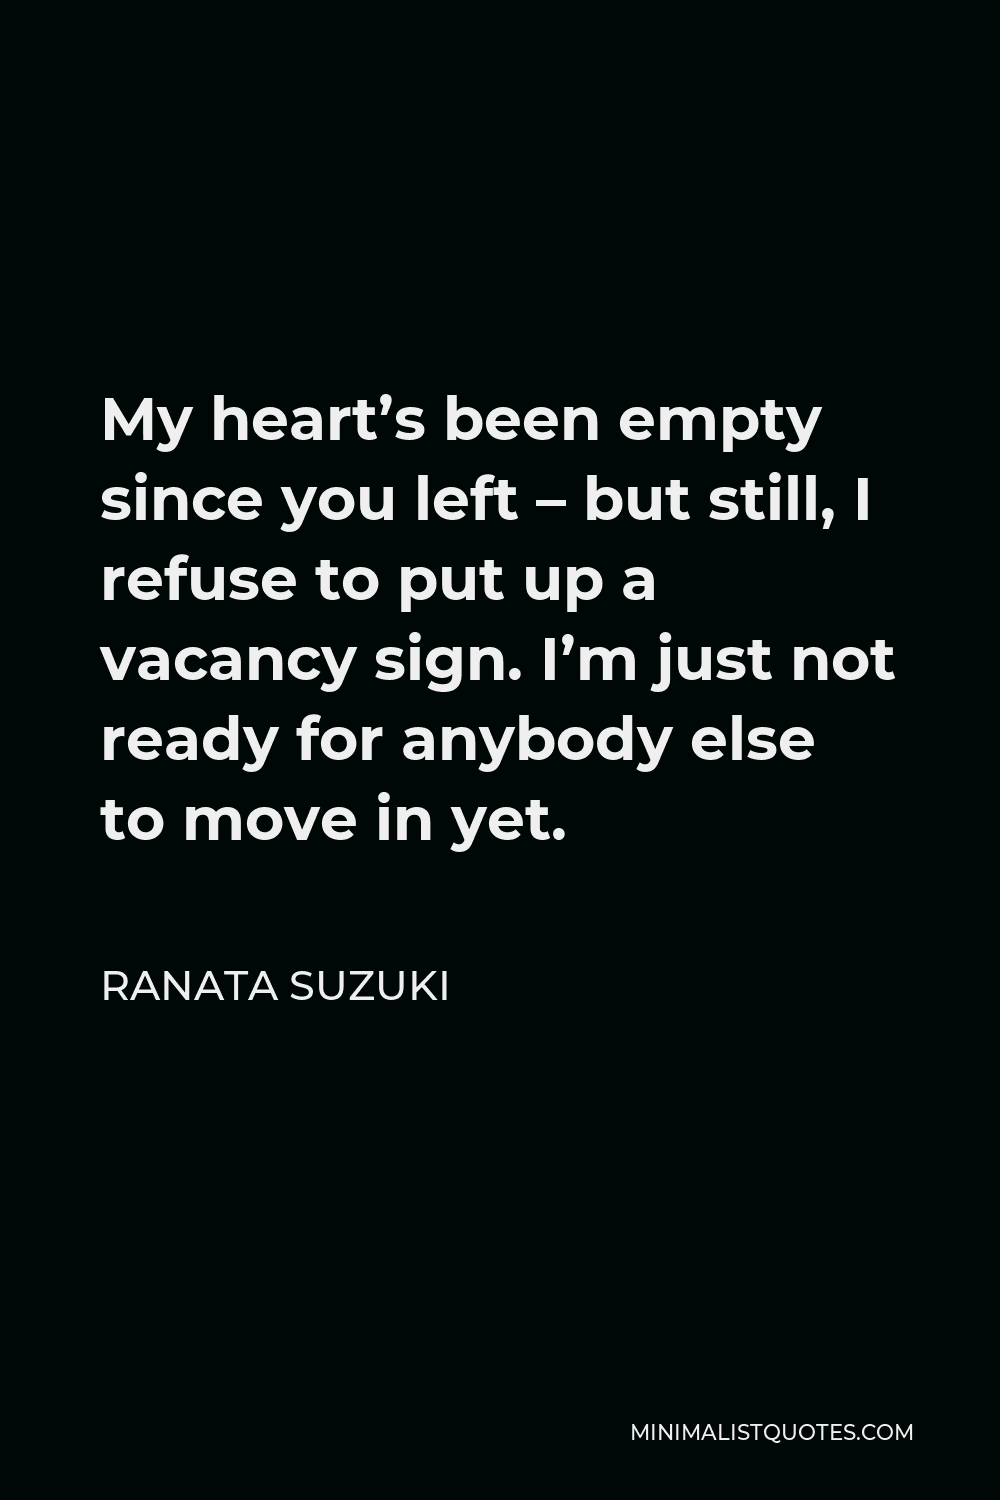 Ranata Suzuki Quote - My heart’s been empty since you left – but still, I refuse to put up a vacancy sign. I’m just not ready for anybody else to move in yet.